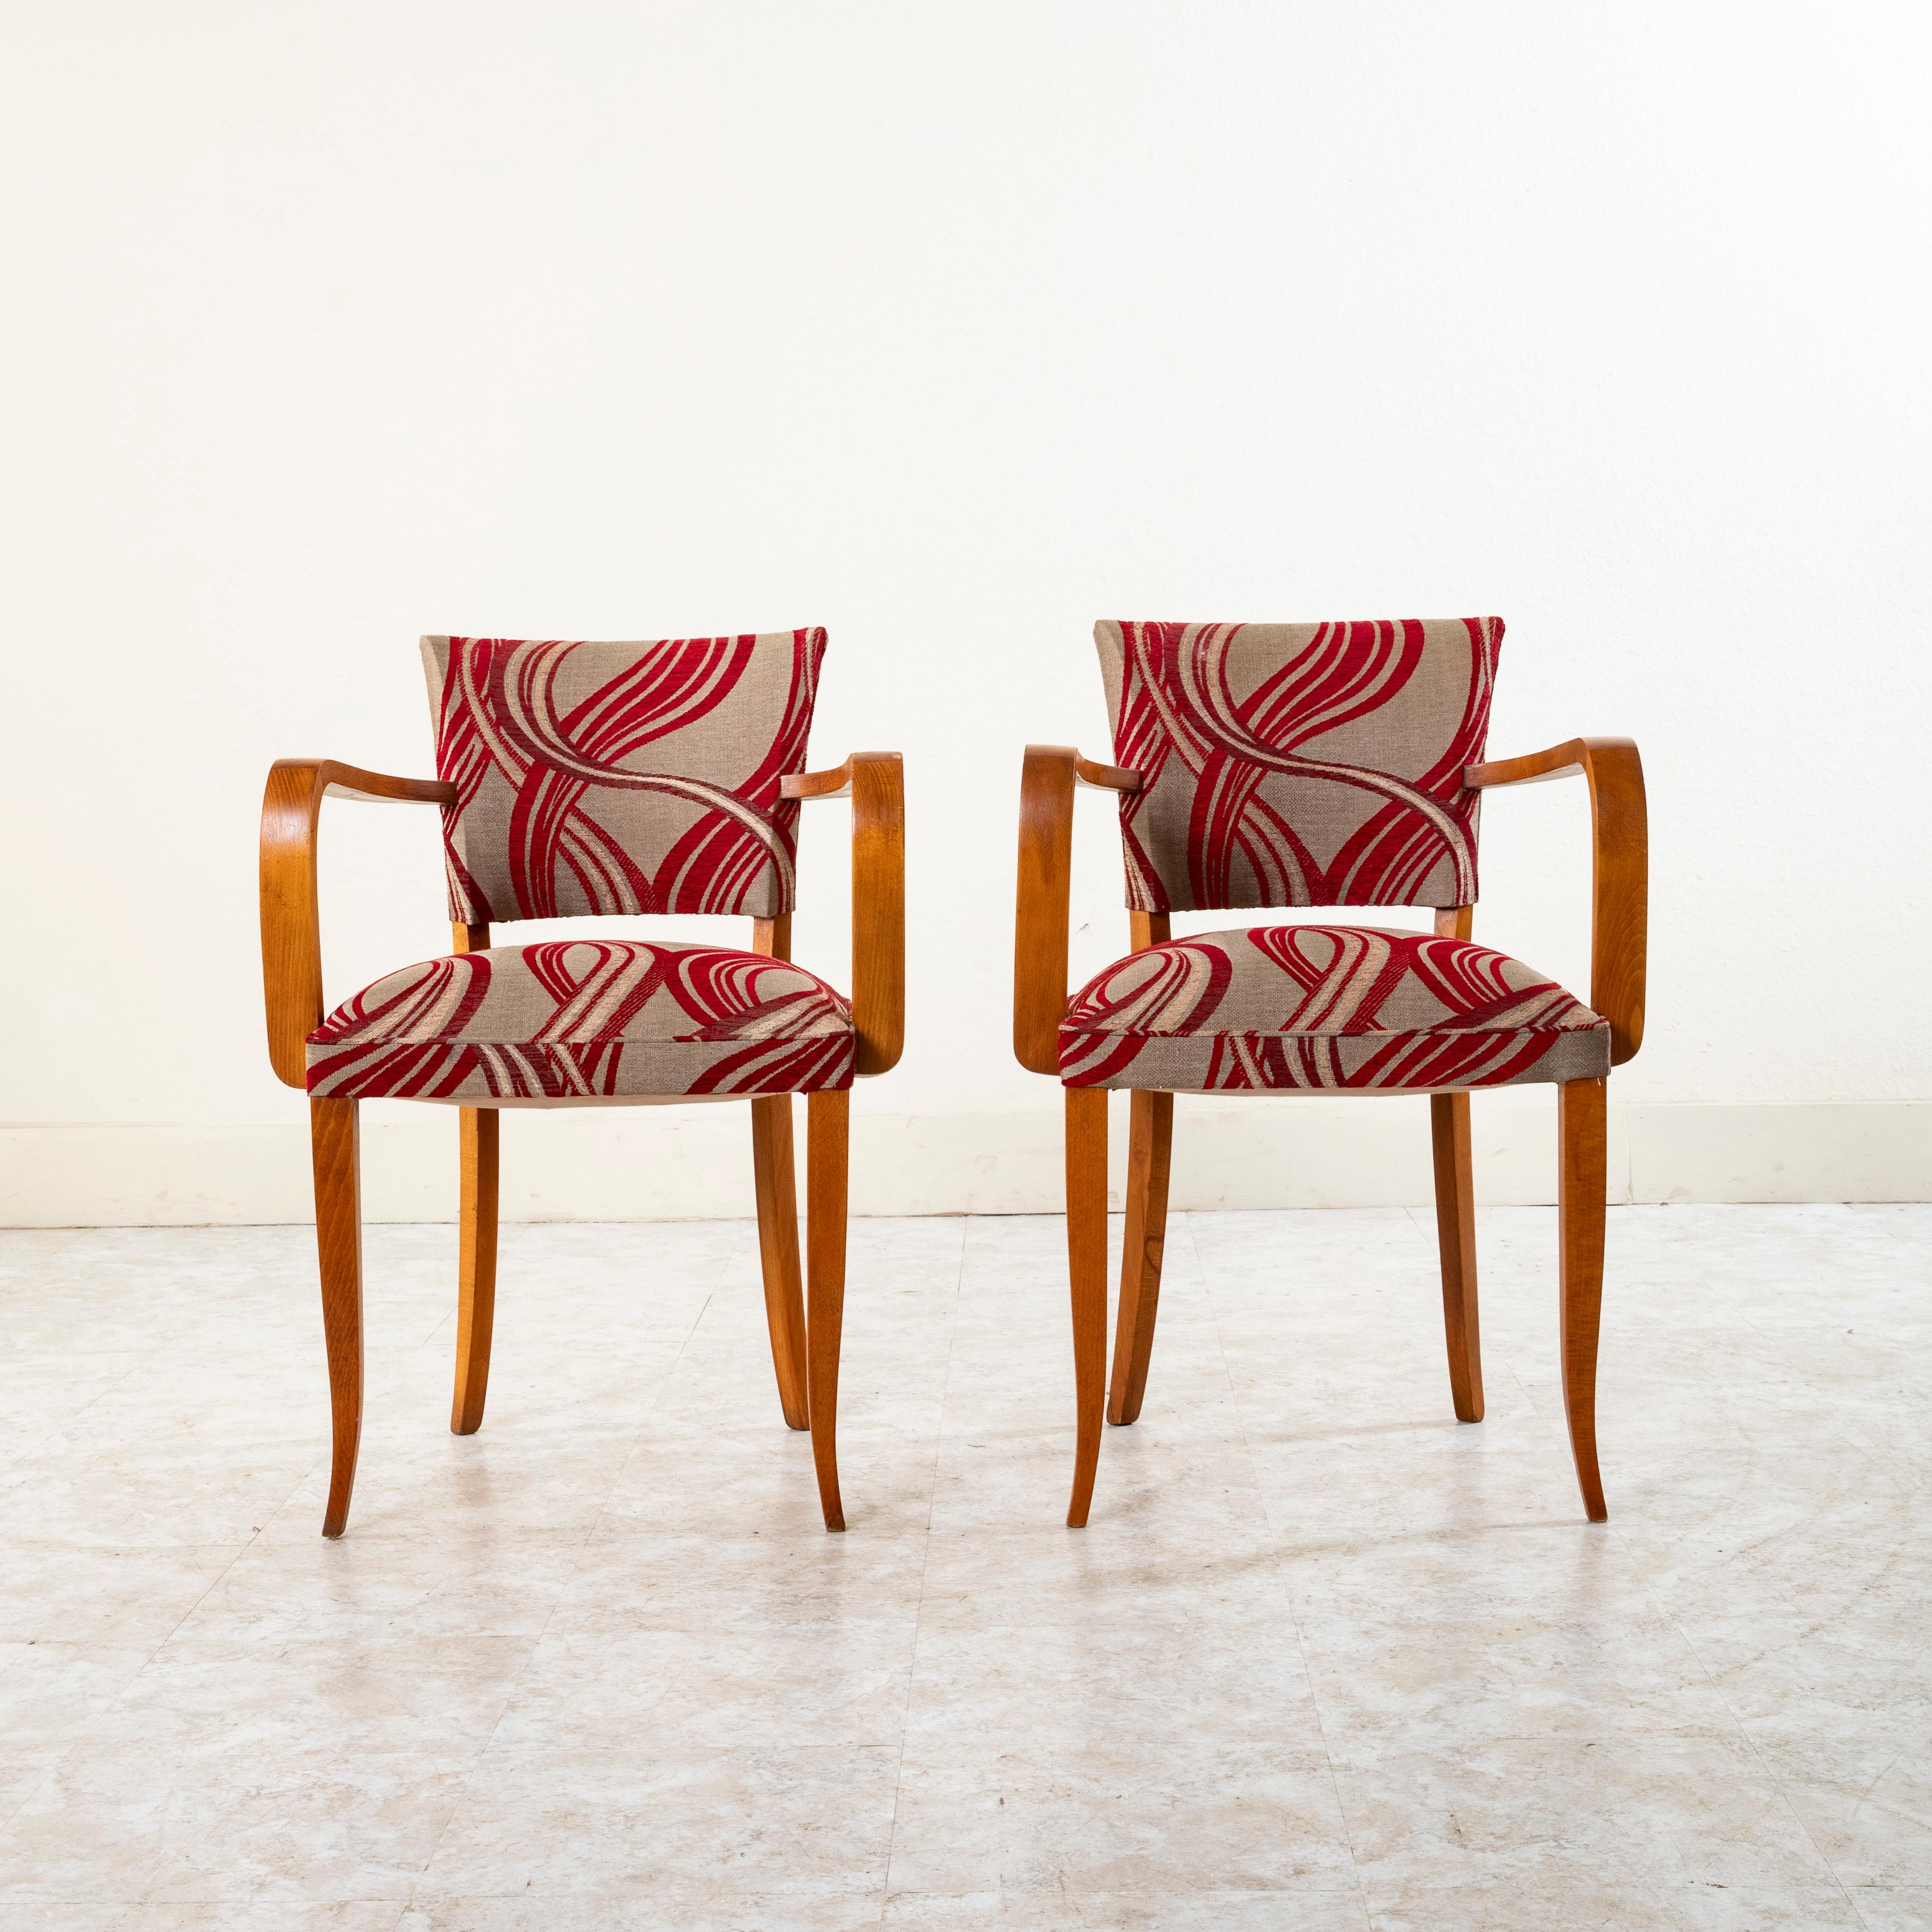 Mid-Century Modern Mid-20th Century French Walnut Bridge Chairs in Red and Gray Upholstery For Sale